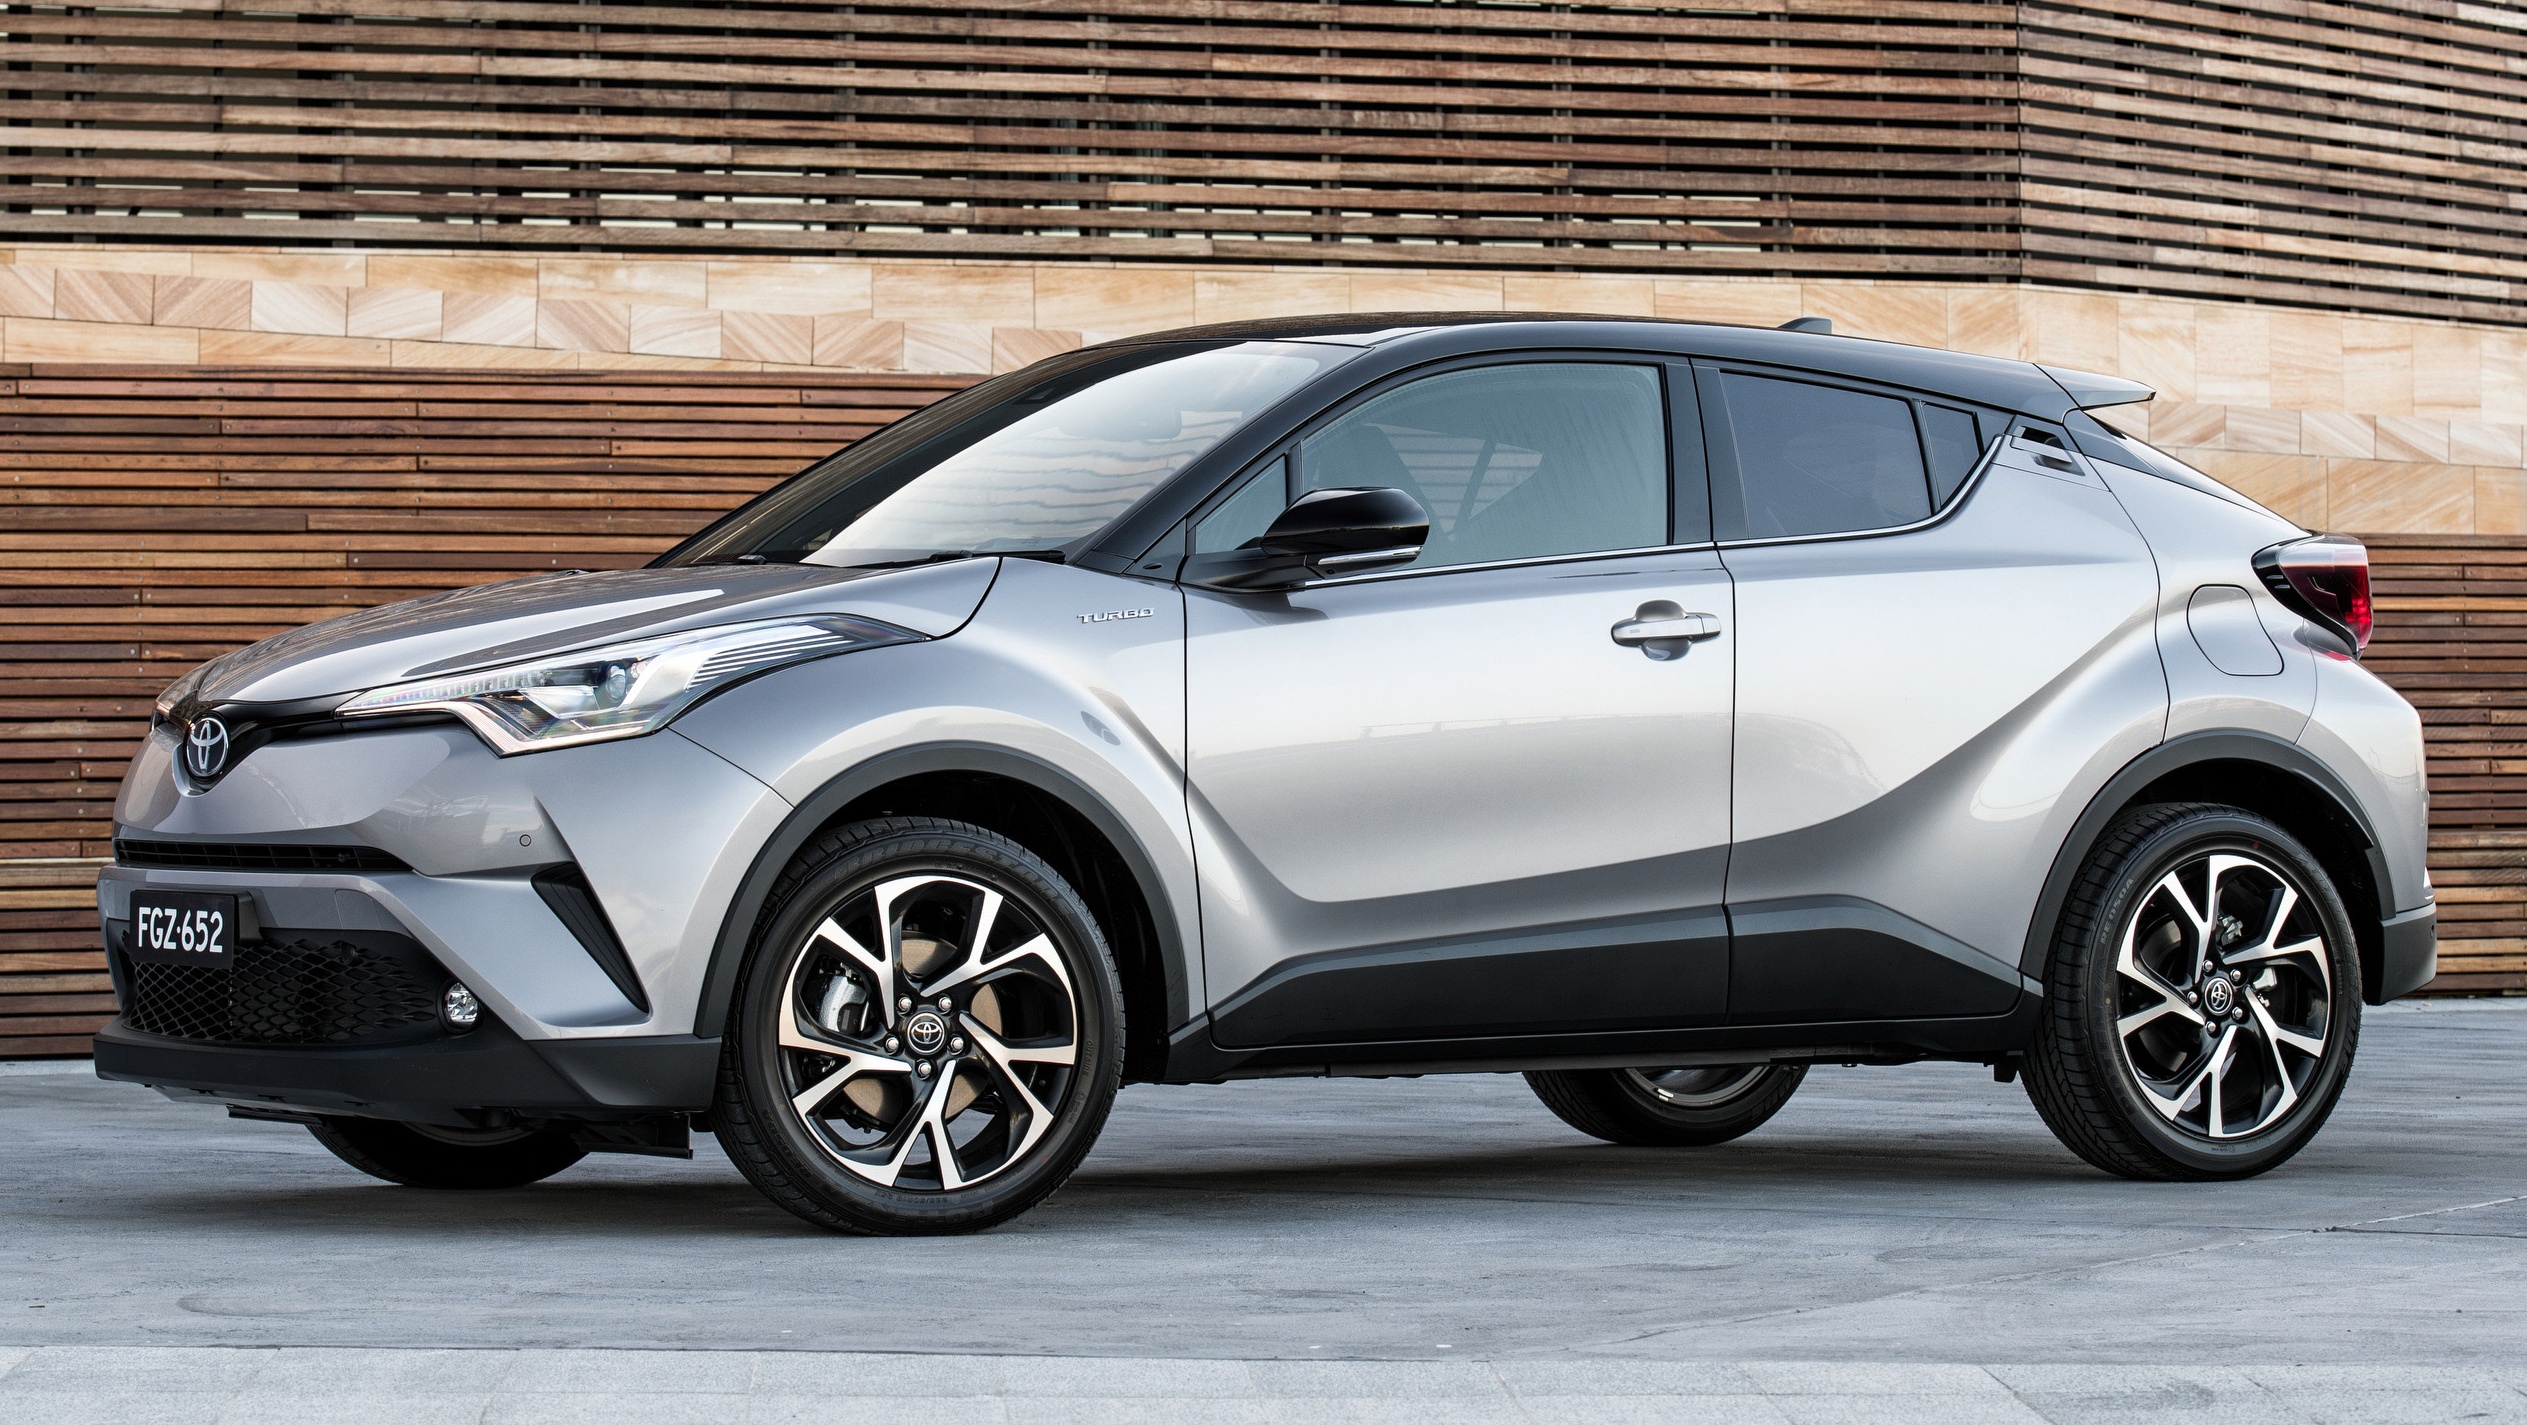 Update1 With 30 New Photos - 2014 Toyota C-HR Concept